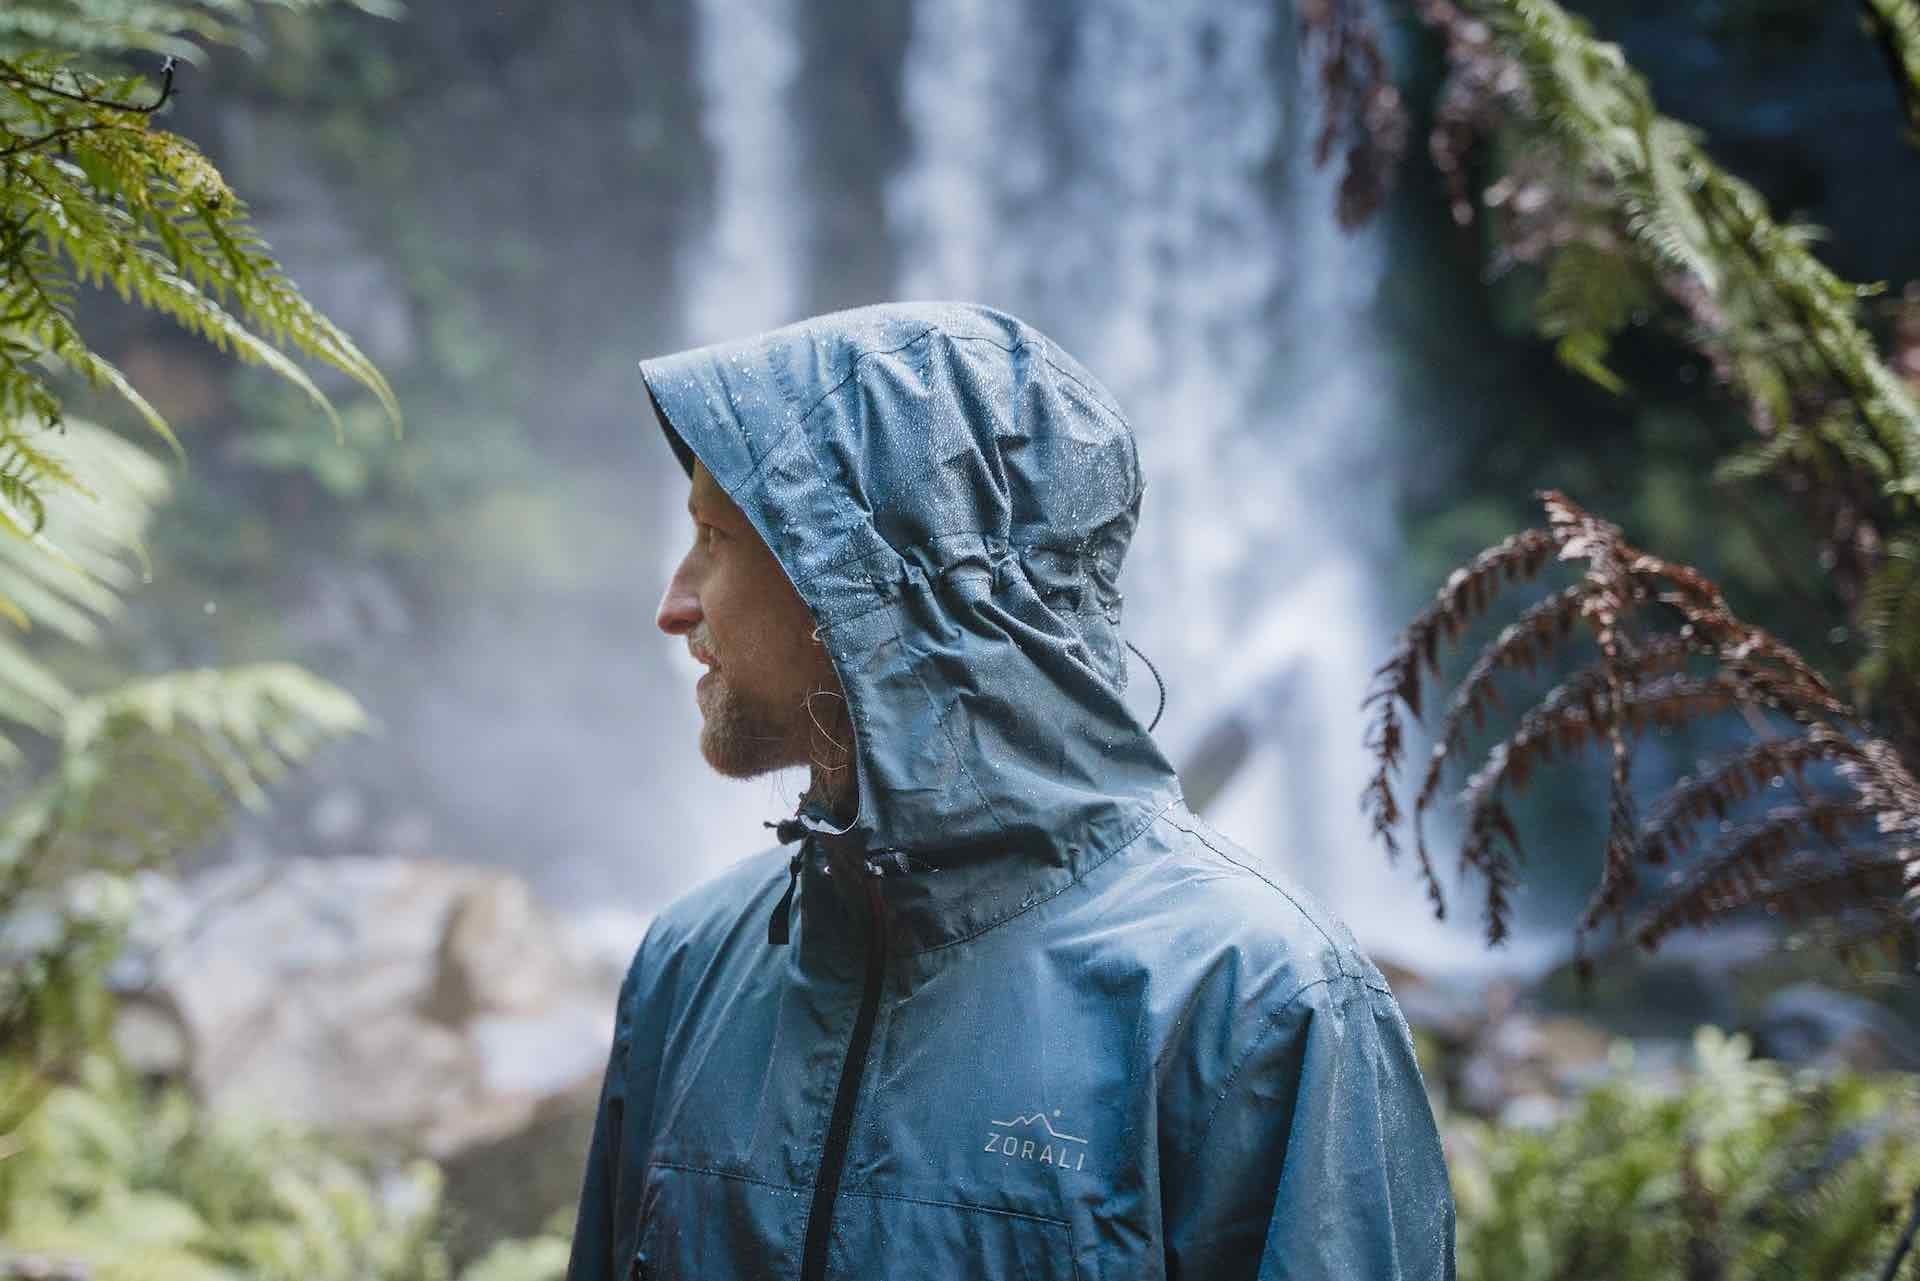 TikTok Meets the Great Outdoors in Zorali's New Video, photo supplied by Zorali, rain jacket, man, waterfall